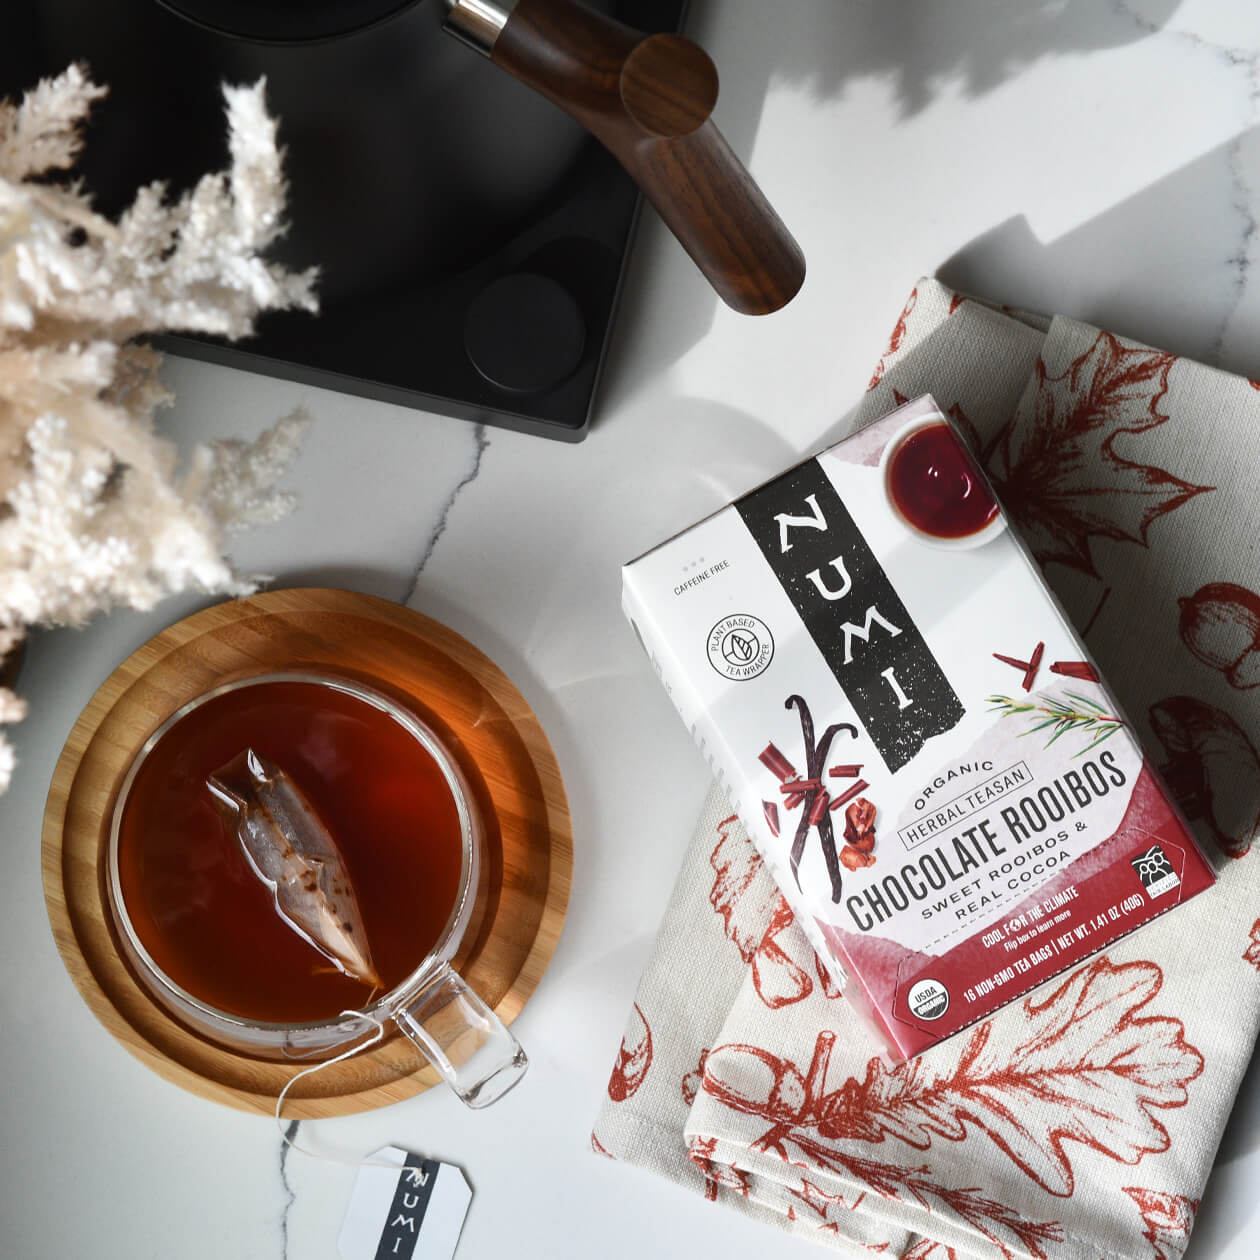 A box of Numi Chocolate Rooibos on a countertop with a tea kettle and cup of brewed tea